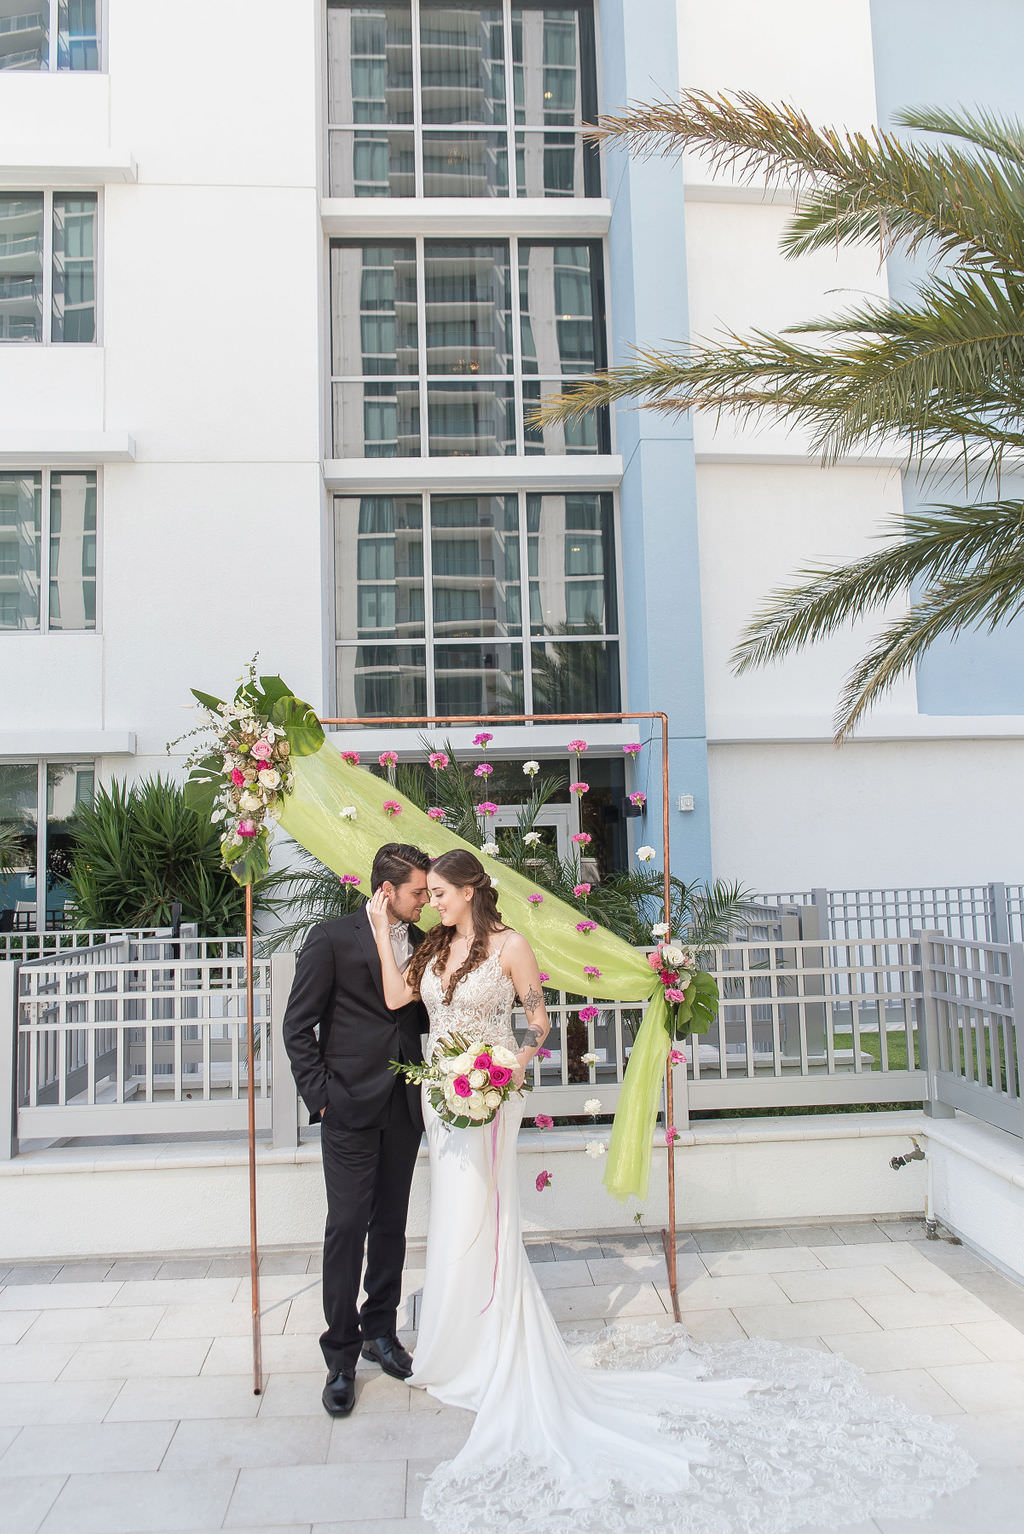 Modern Bride and Groom Wedding Portrait, Colorful Tropical Wedding Ceremony Decor, Copper Arch, Fuschia Pink and White Hanging Carnations, Lime Green Draping, Pink and Ivory Roses, Monstera Palm Leaf Floral Arrangement | Tampa Bay Wedding Photographer Kristen Marie Photography | Hotel Wedding Venue Hyatt Place Downtown St. Pete | Wedding Florist Brides N Blooms | Wedding Attire Nikki's Glitz and Glam Boutique | Outside the Box Event Rentals | Wedding Hair and Makeup LDM Beauty Group